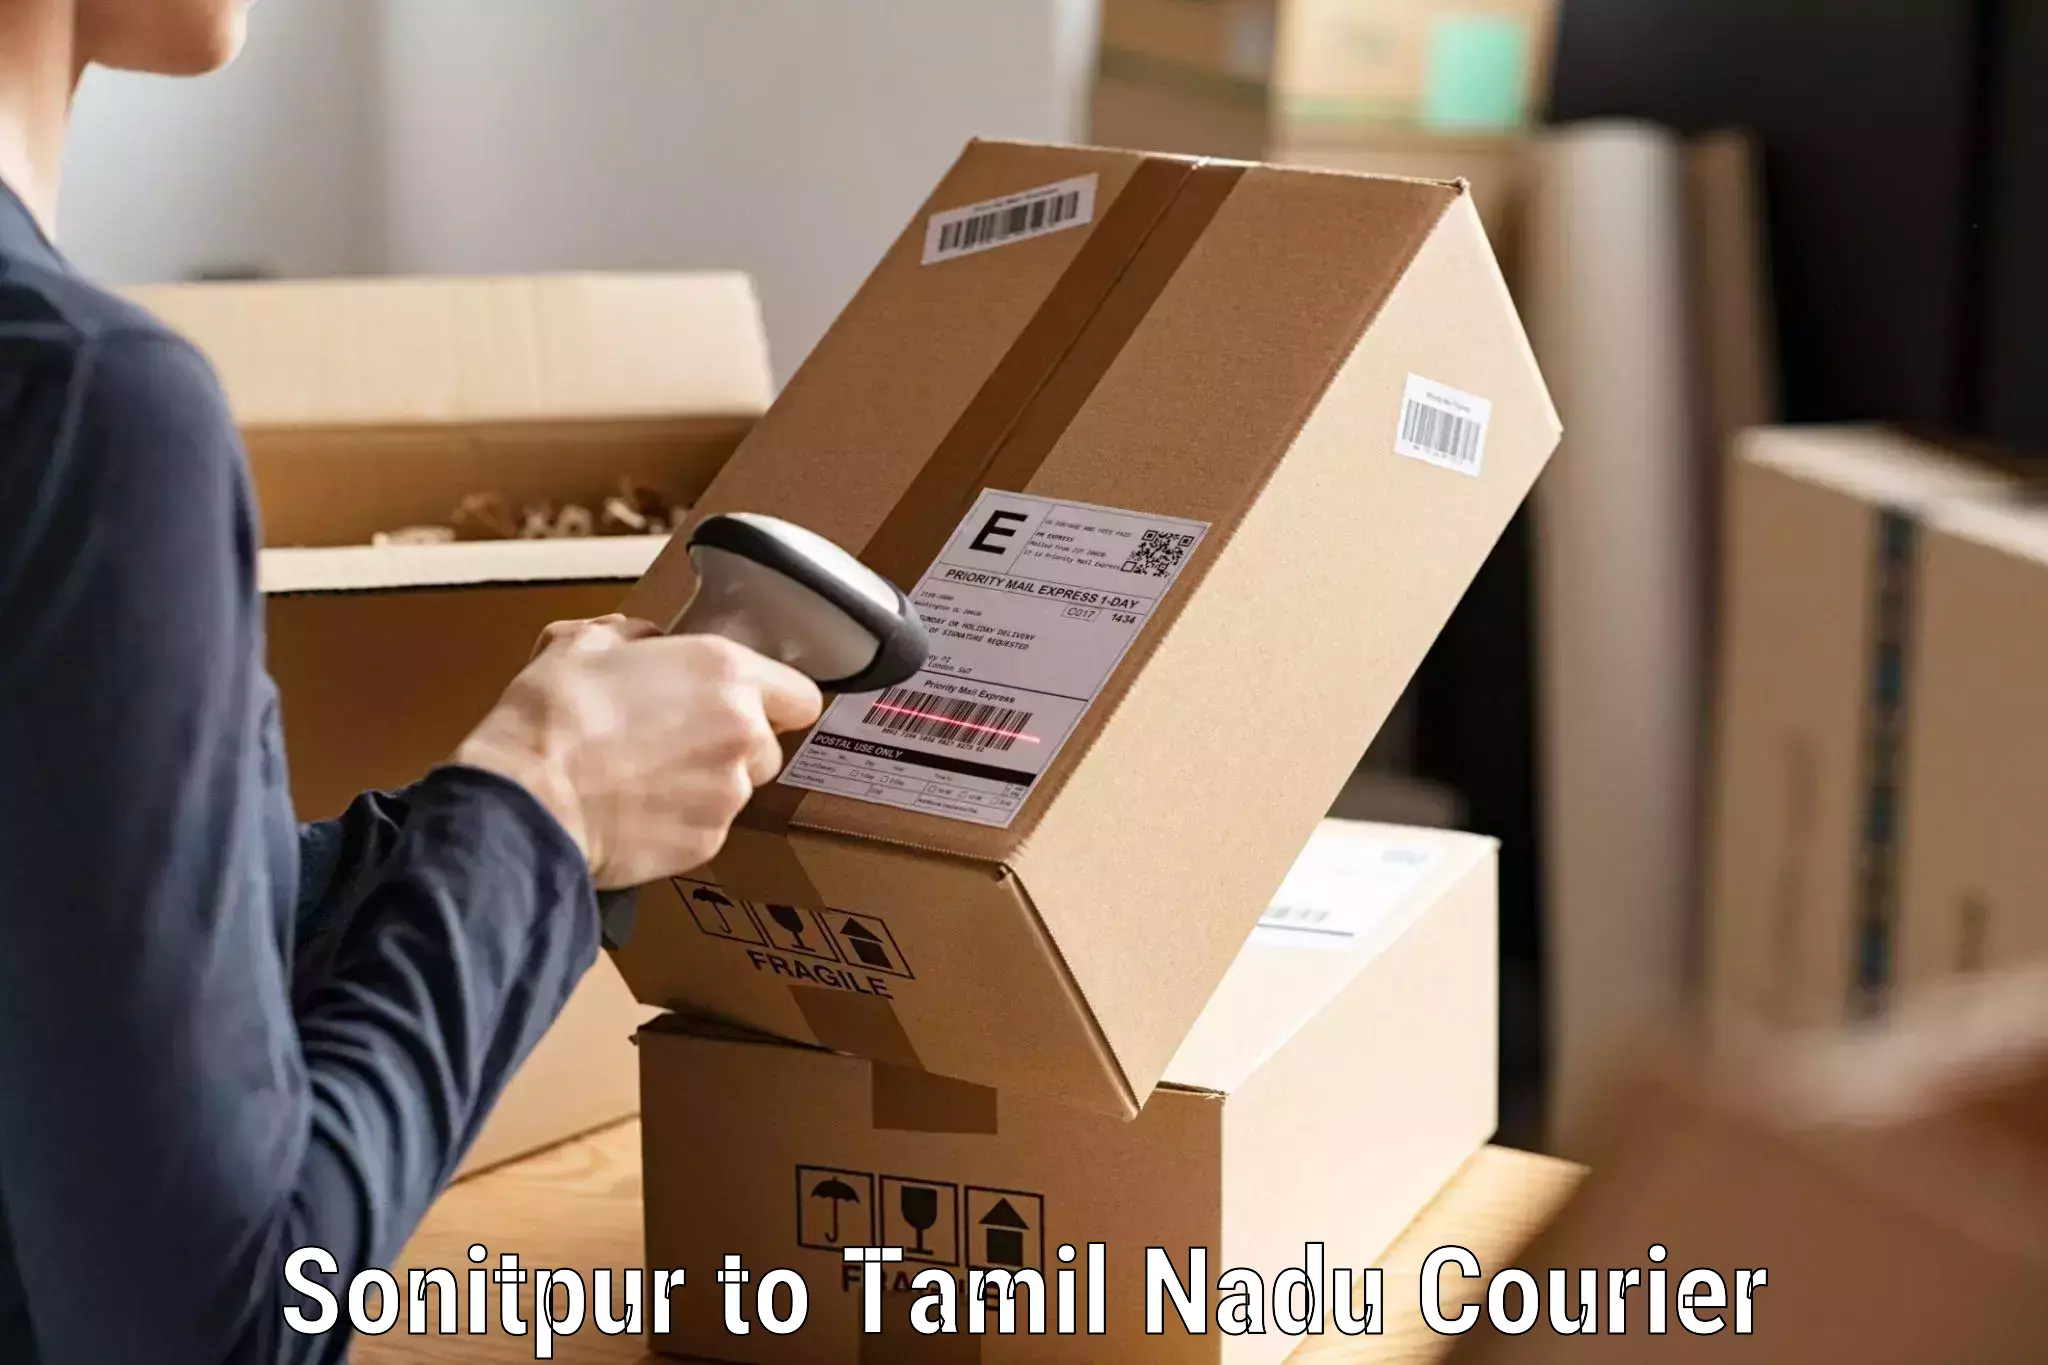 Efficient parcel delivery Sonitpur to Mylapore